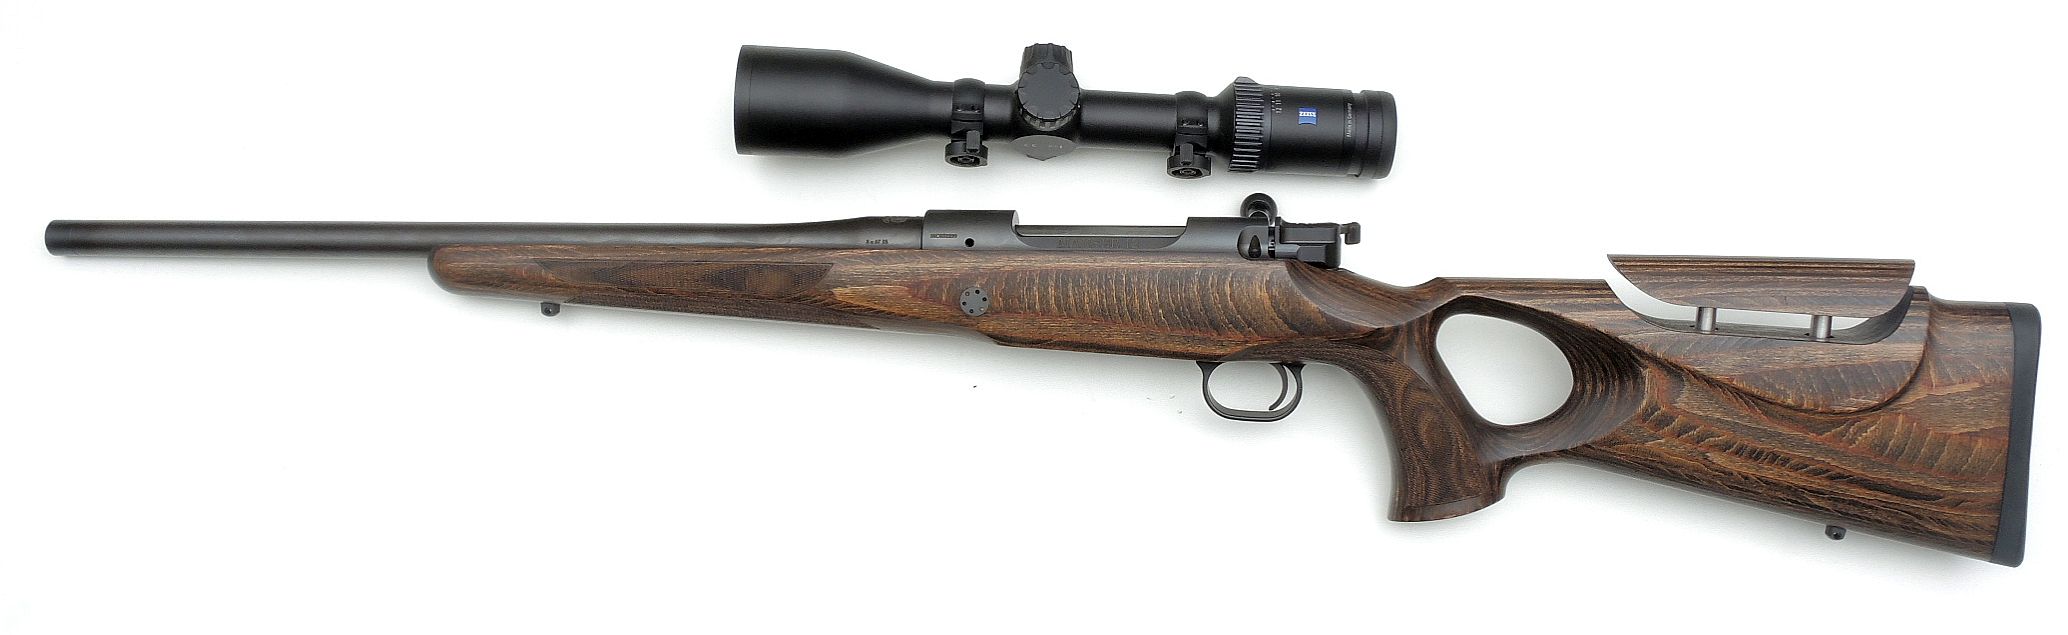 Mauser M12S BIG MAX 308Win. Zeiss Conquest V6 2-12x50